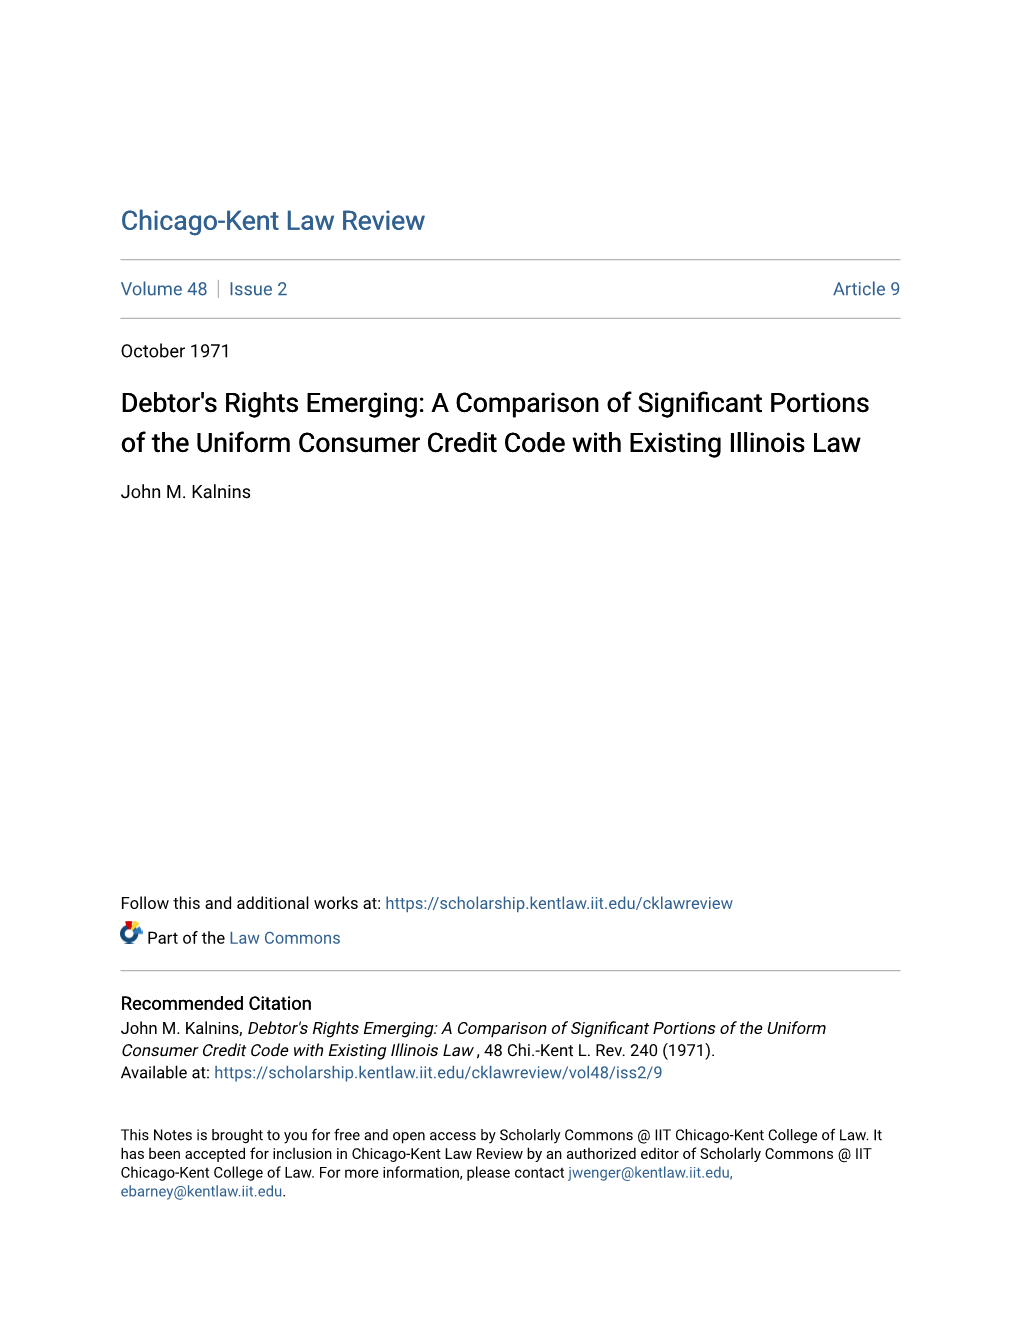 A Comparison of Significant Portions of the Uniform Consumer Credit Code with Existing Illinois Law , 48 Chi.-Kent L